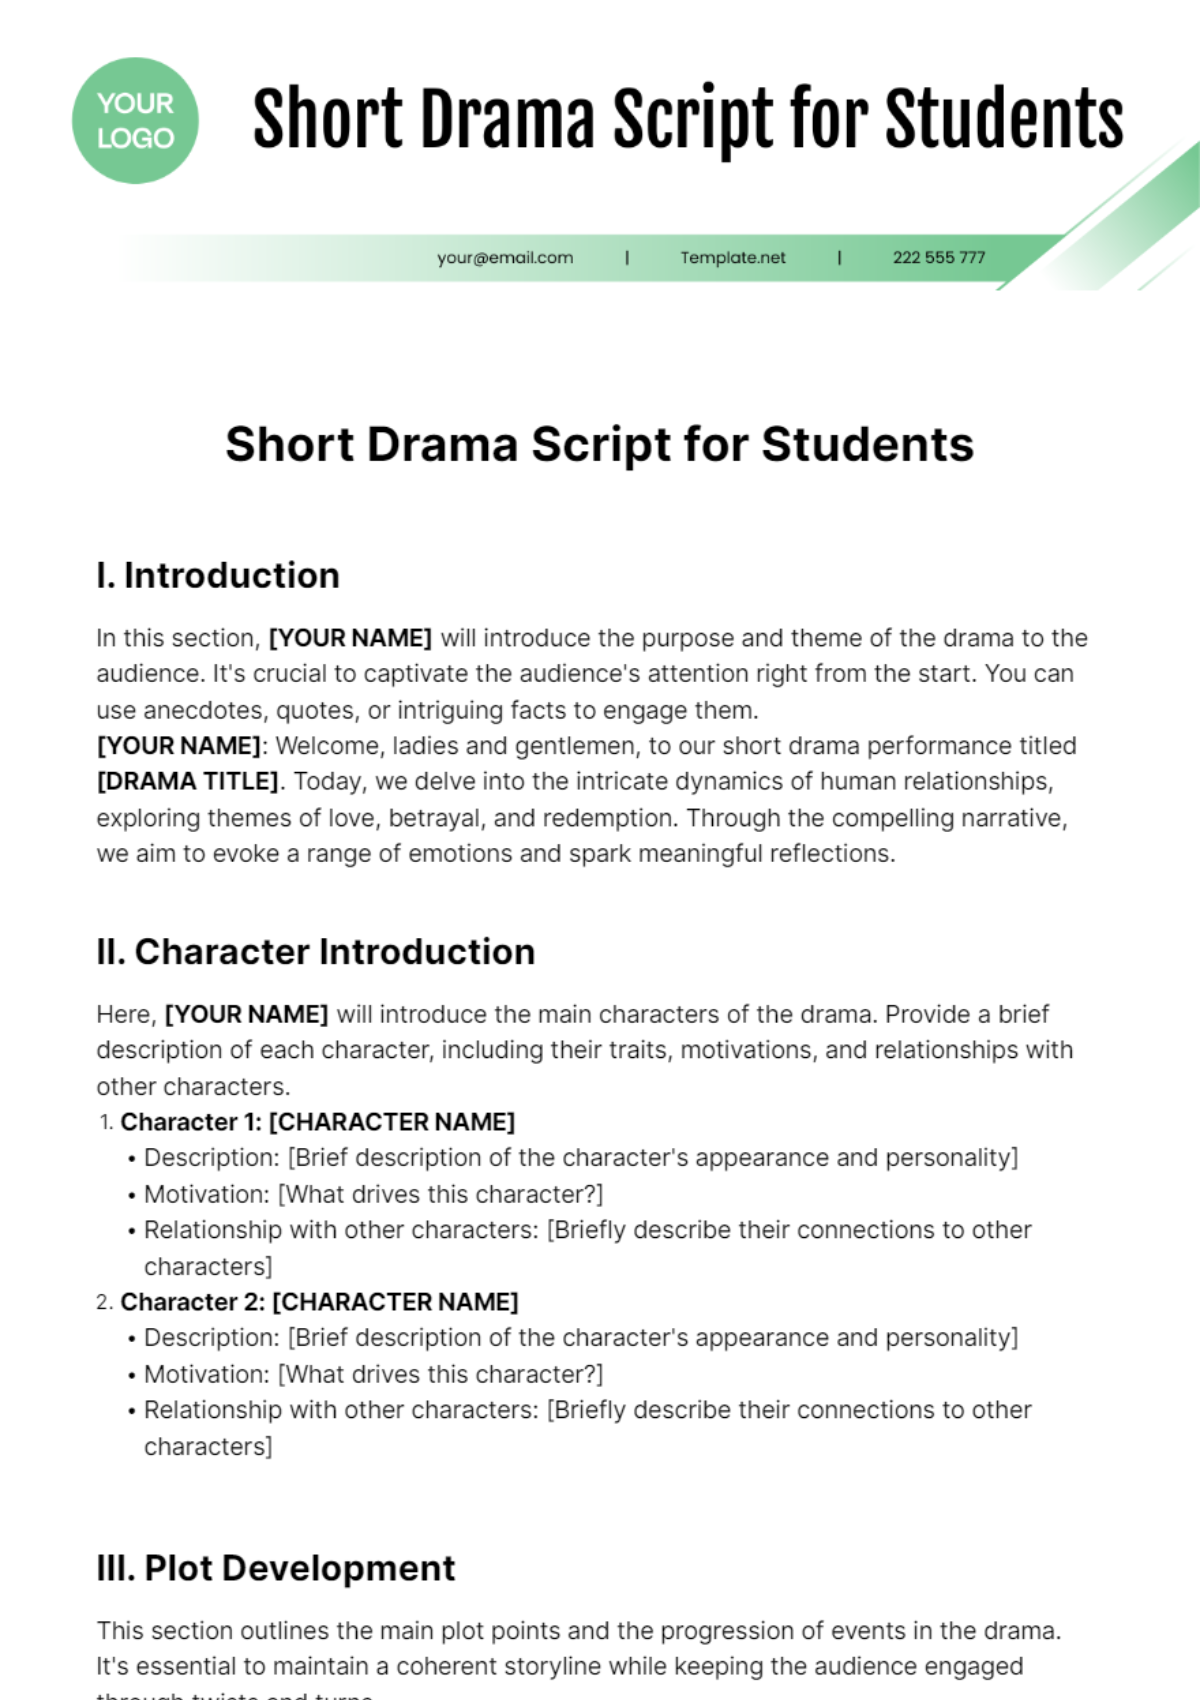 Short Drama Script For Students Template